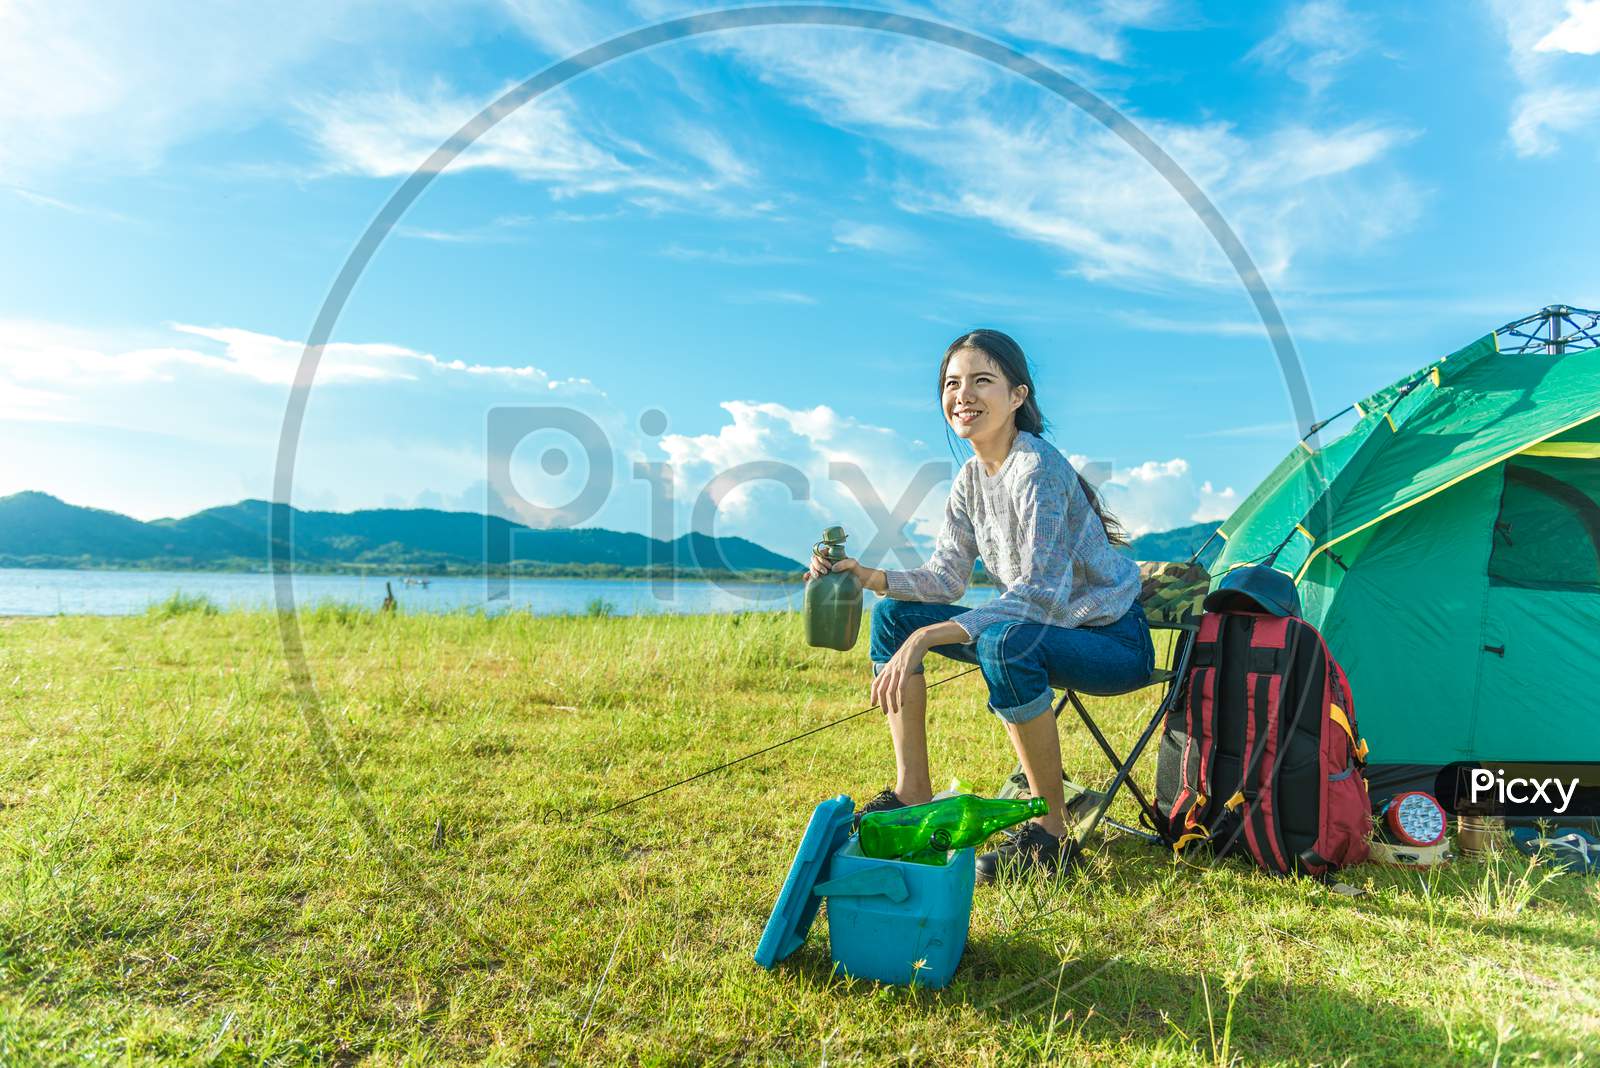 Happy Woman Drinking Alcohol While Camping At Meadow. People And Lifestyles Concept. Travel And Adventure Theme. Female Tourist Portrait